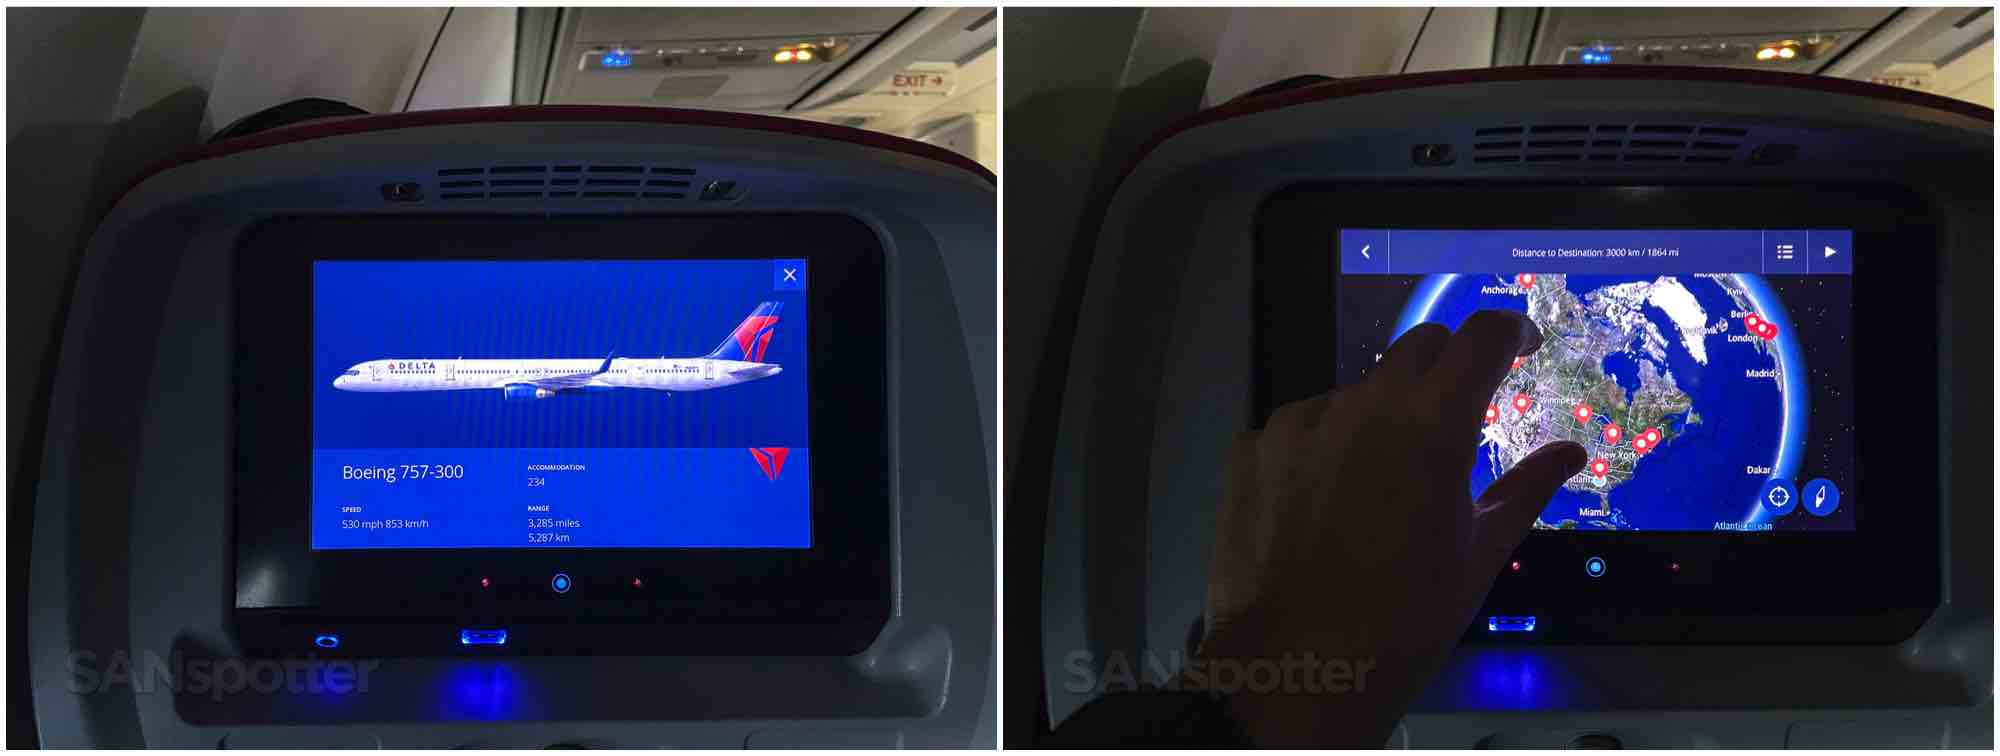 Delta 757-300 Comfort Plus aircraft information and map screens